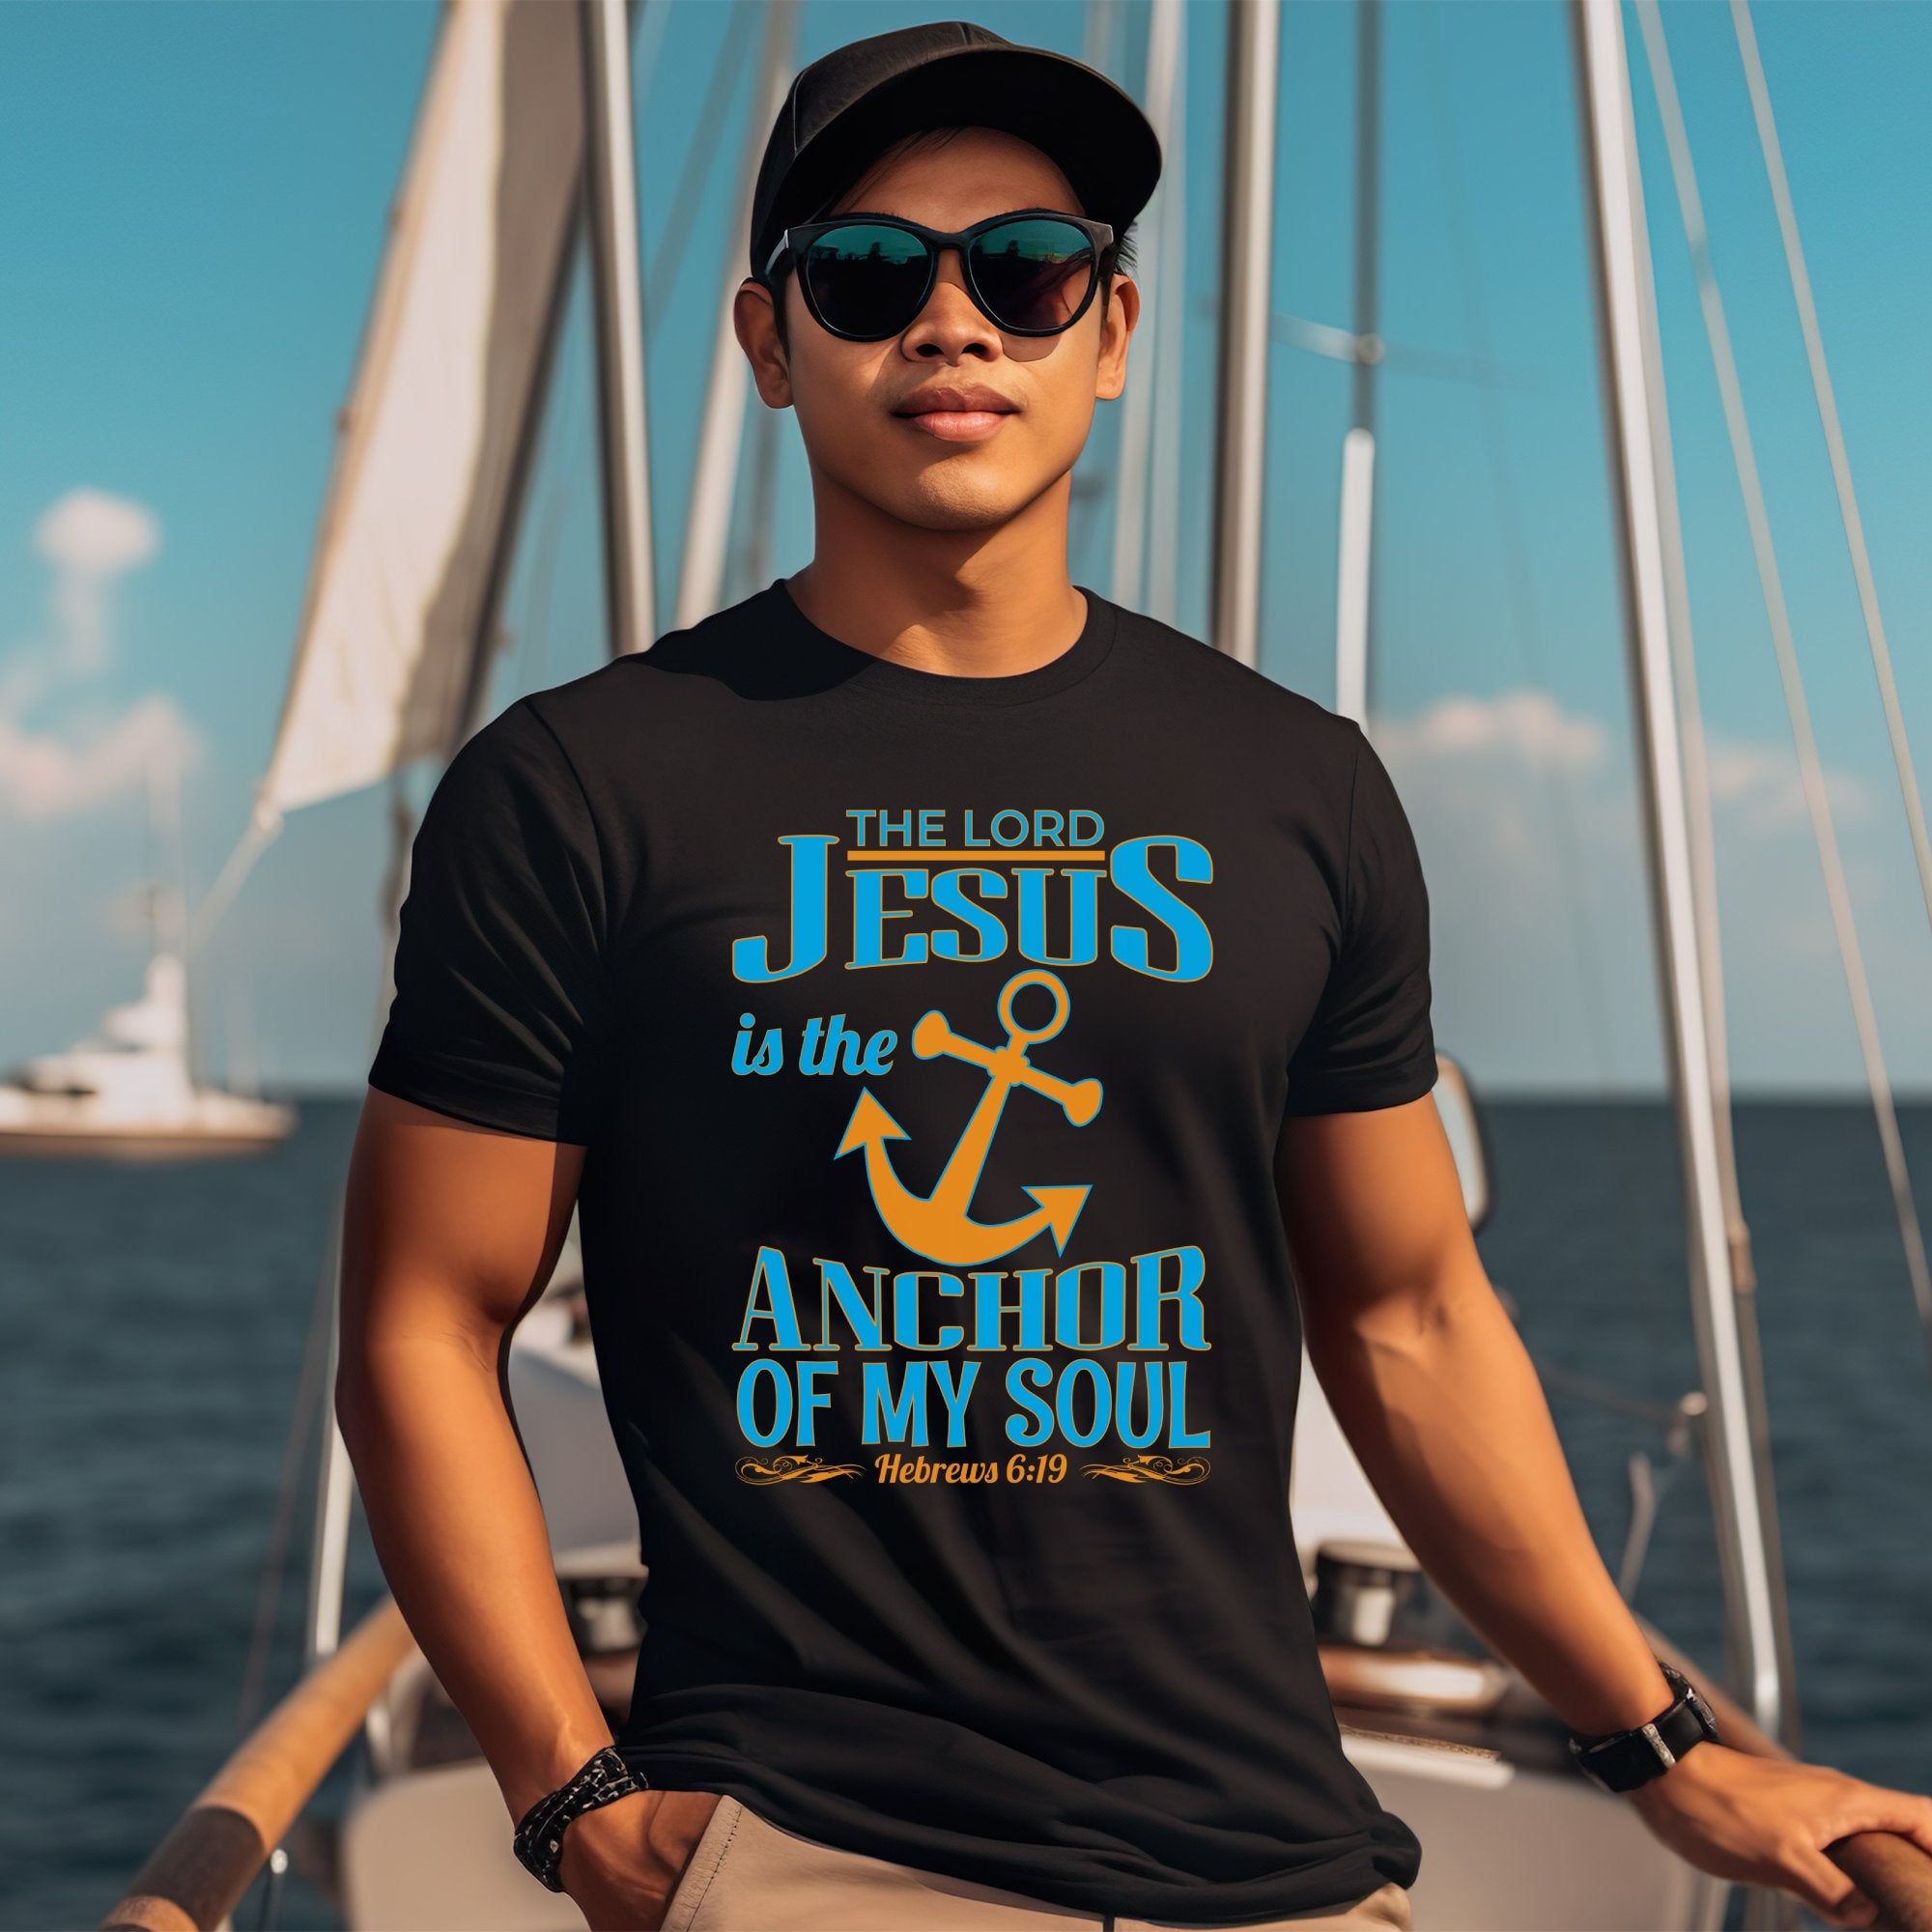 Jesus is the Anchor of my Soul Men's Jersey Short Sleeve Tee Size: XS Color: Solid Black Blend Jesus Passion Apparel